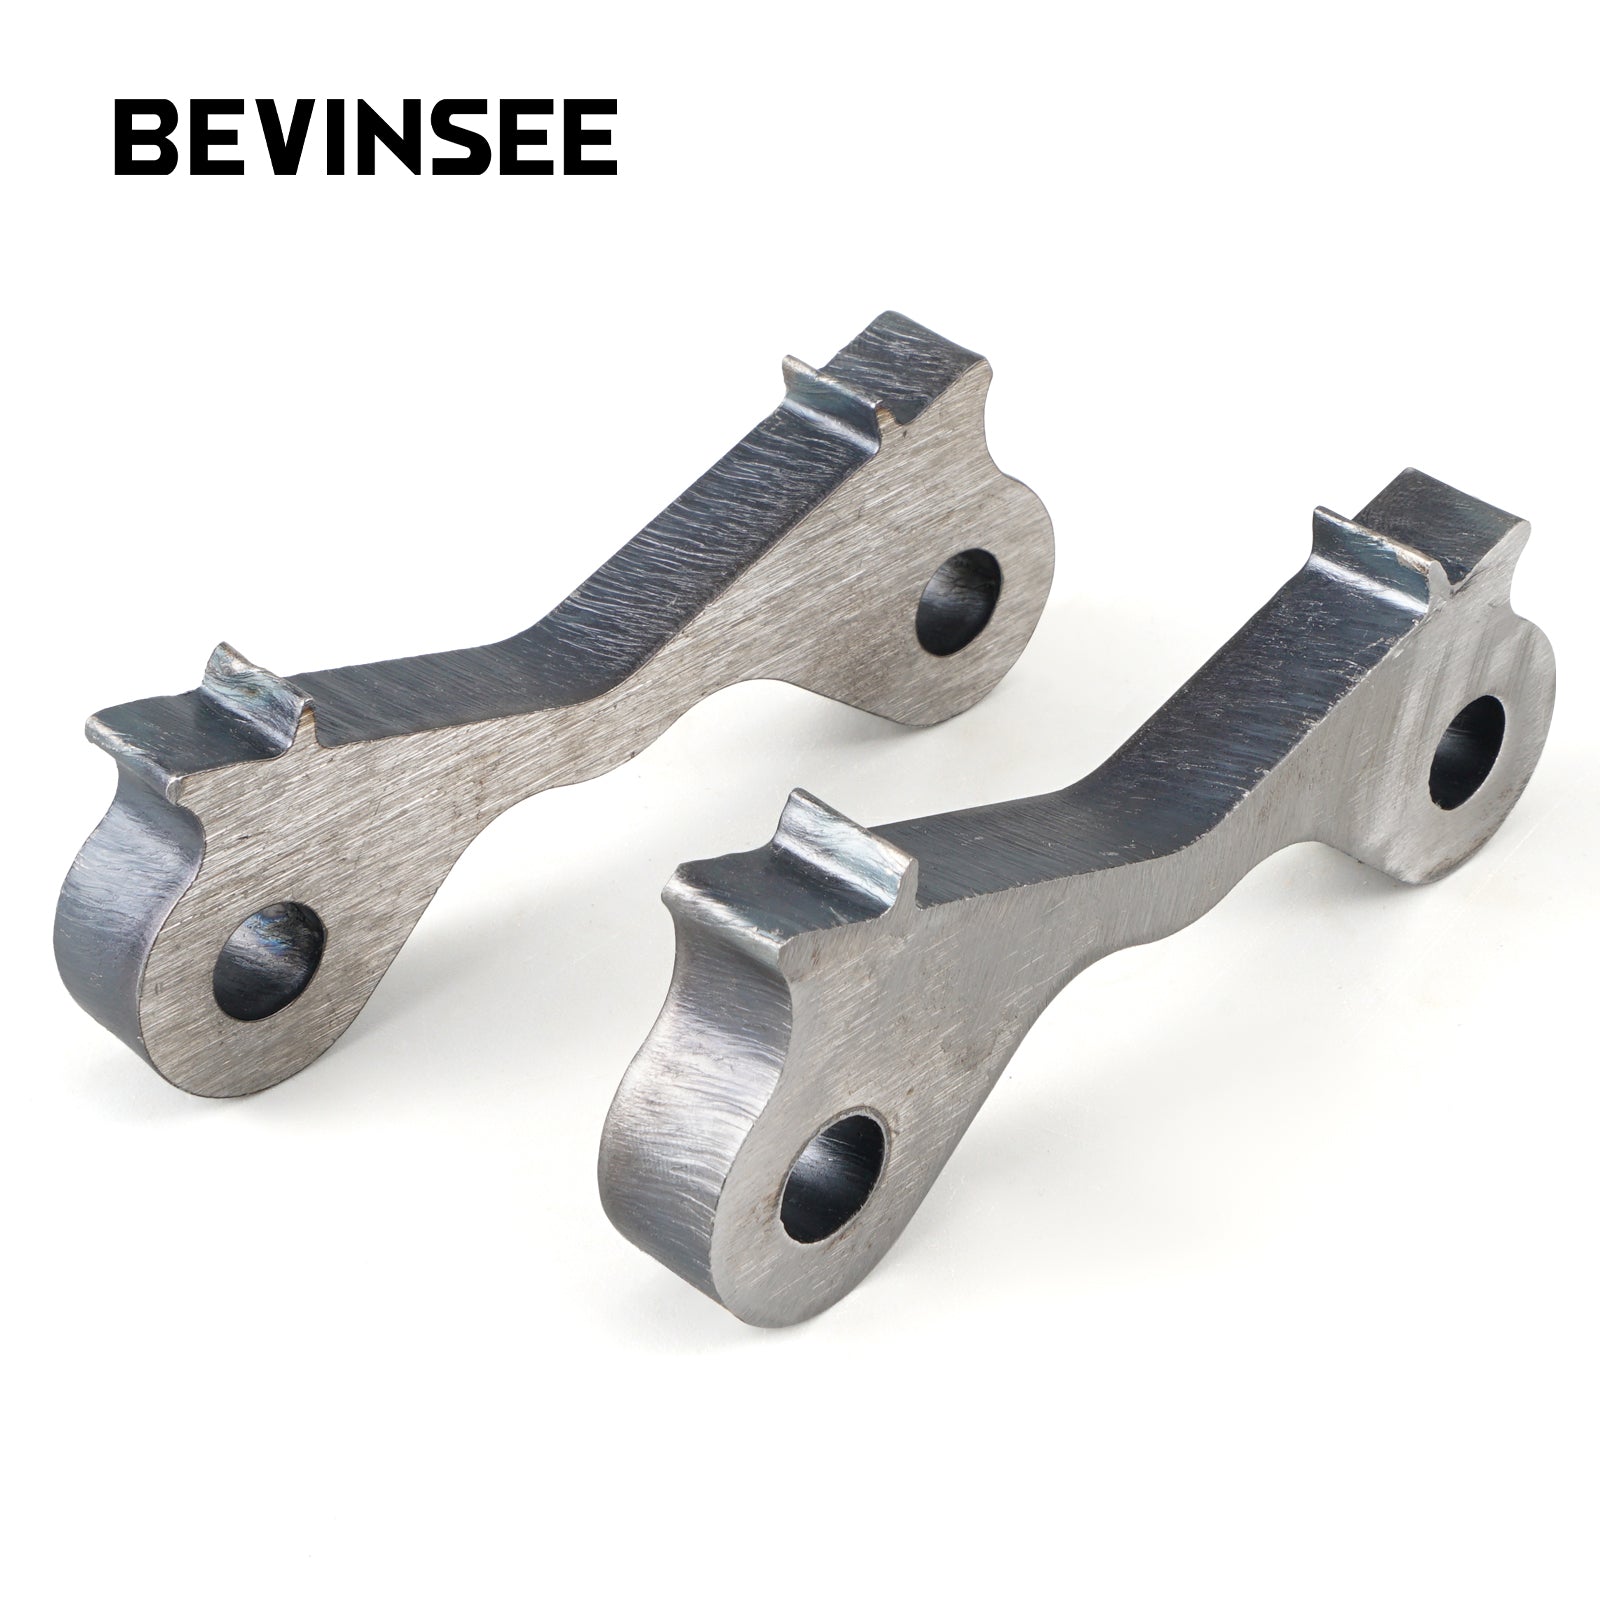 BEVINSEE Drift Dual Brake Calipers Adapters weld-on for BMW E36 E46